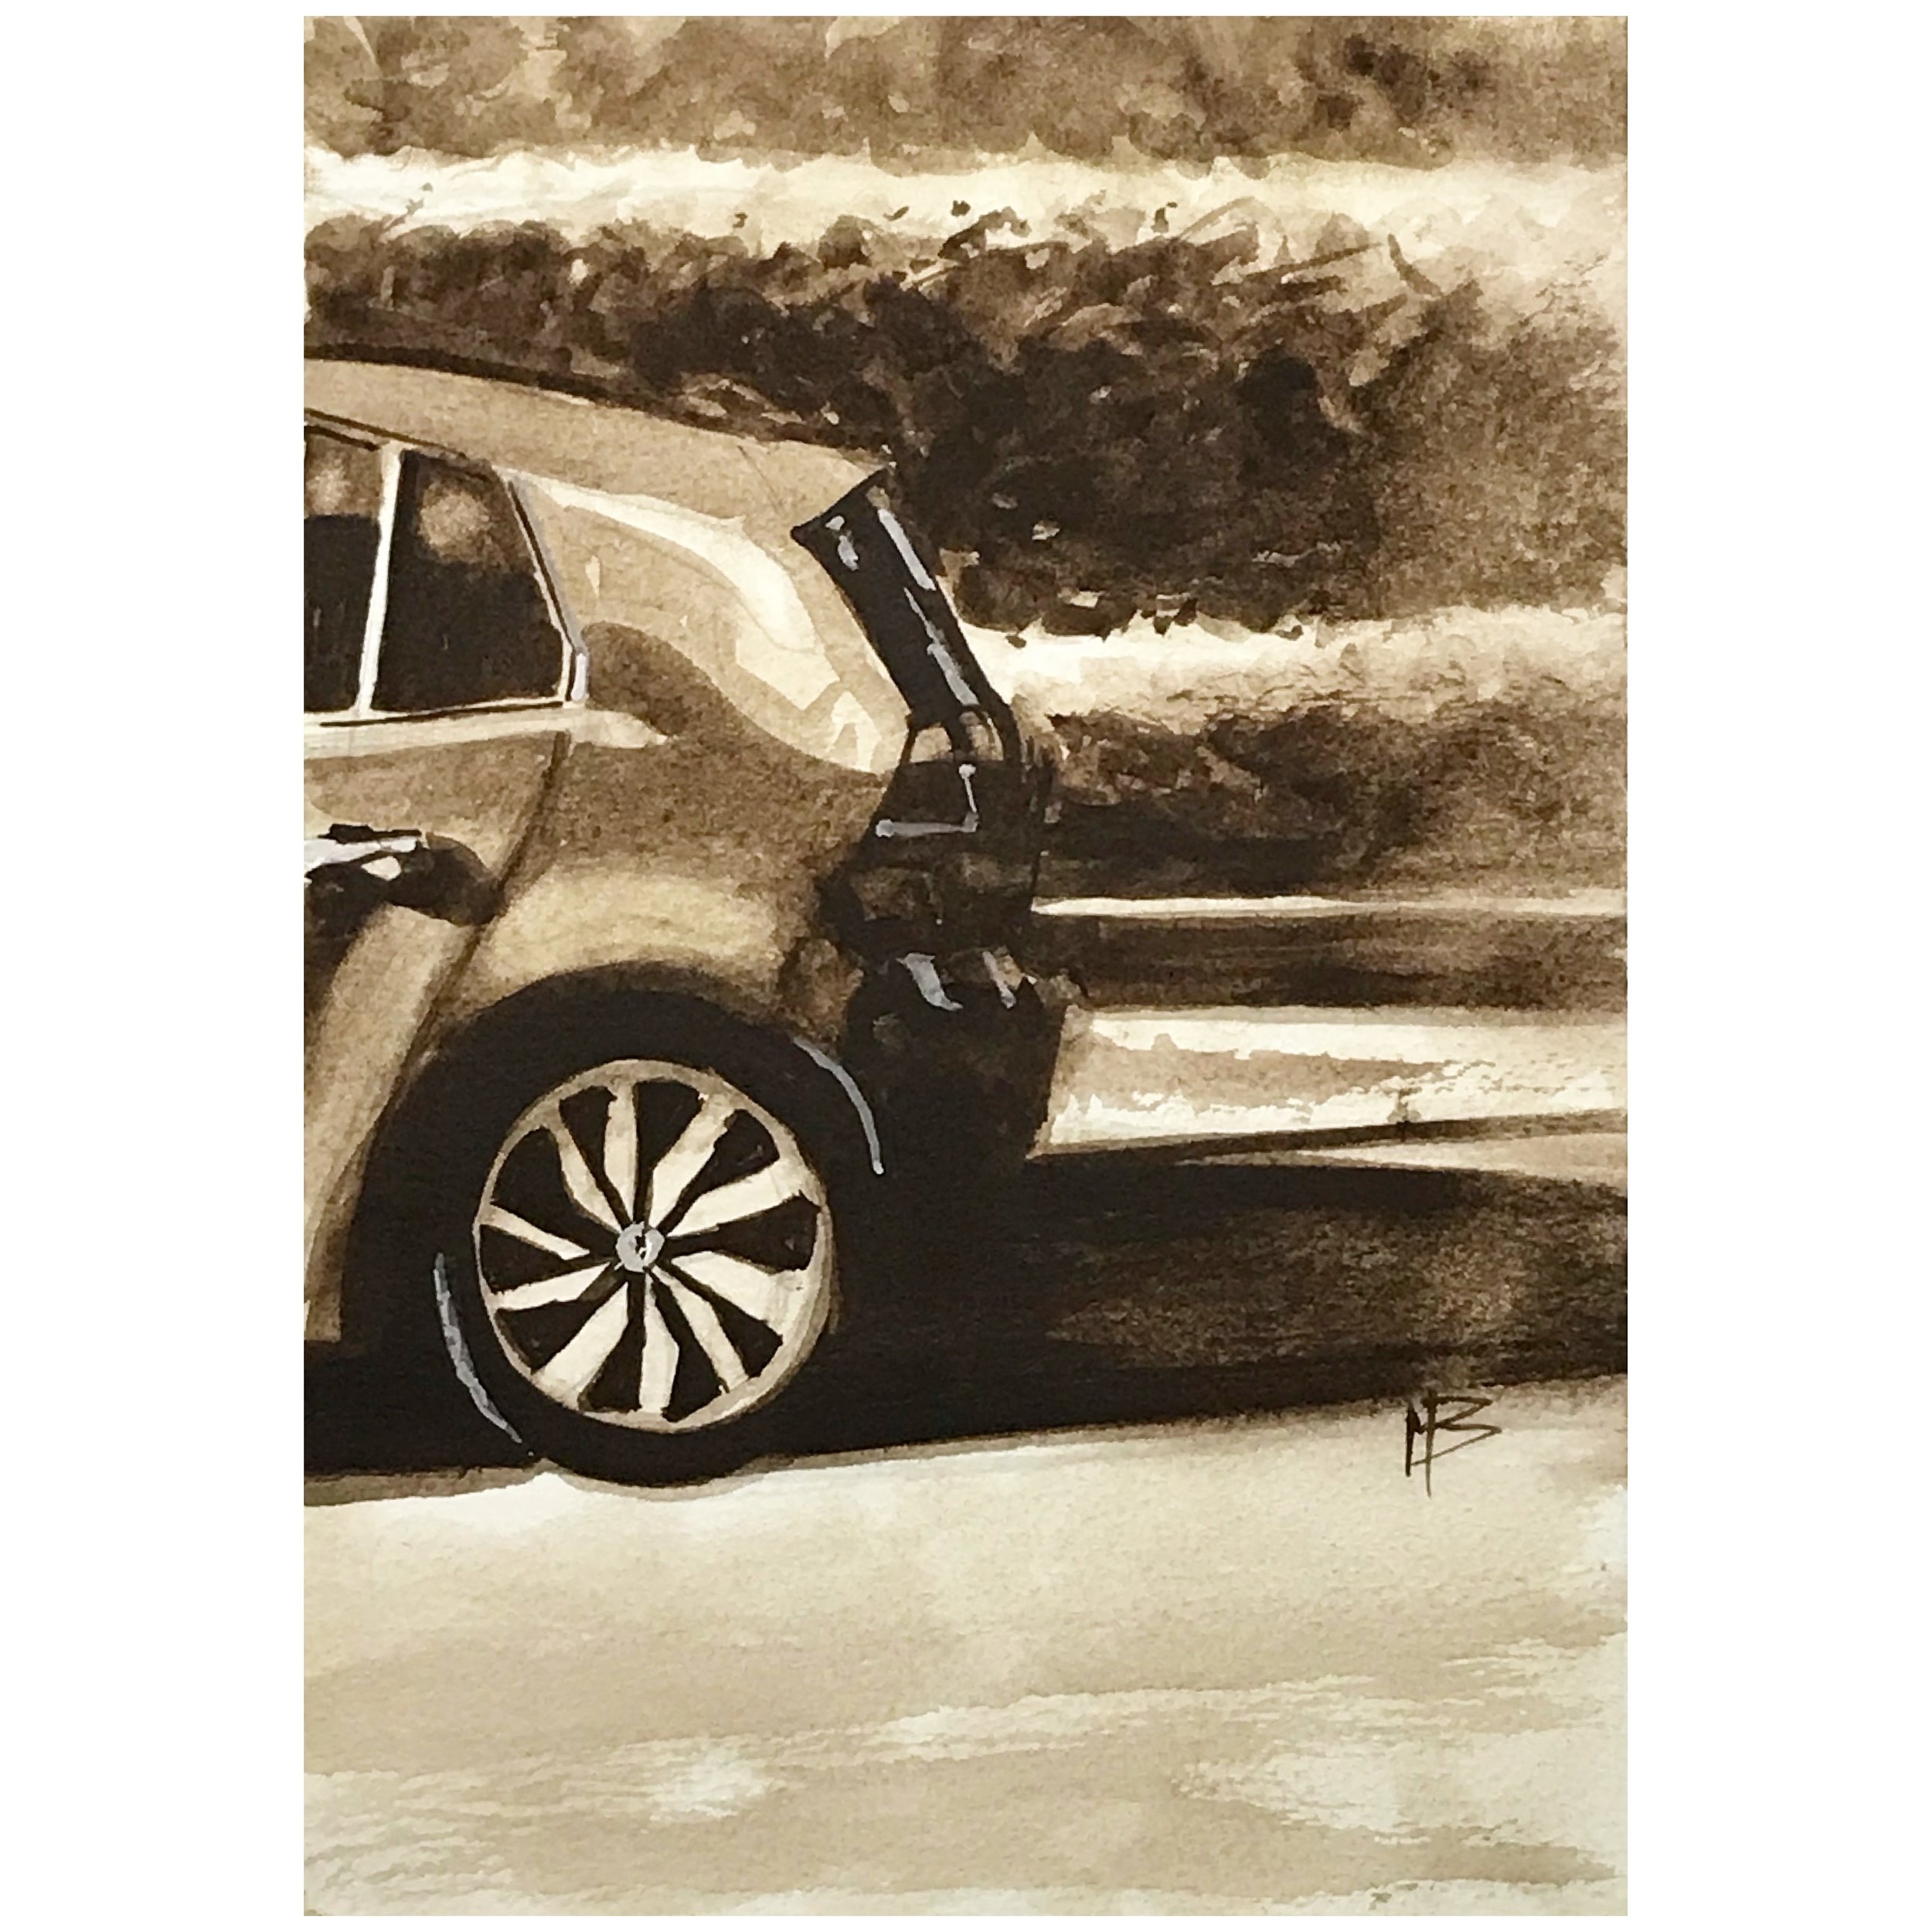 Parked Car / Watercolour and gouache on paper